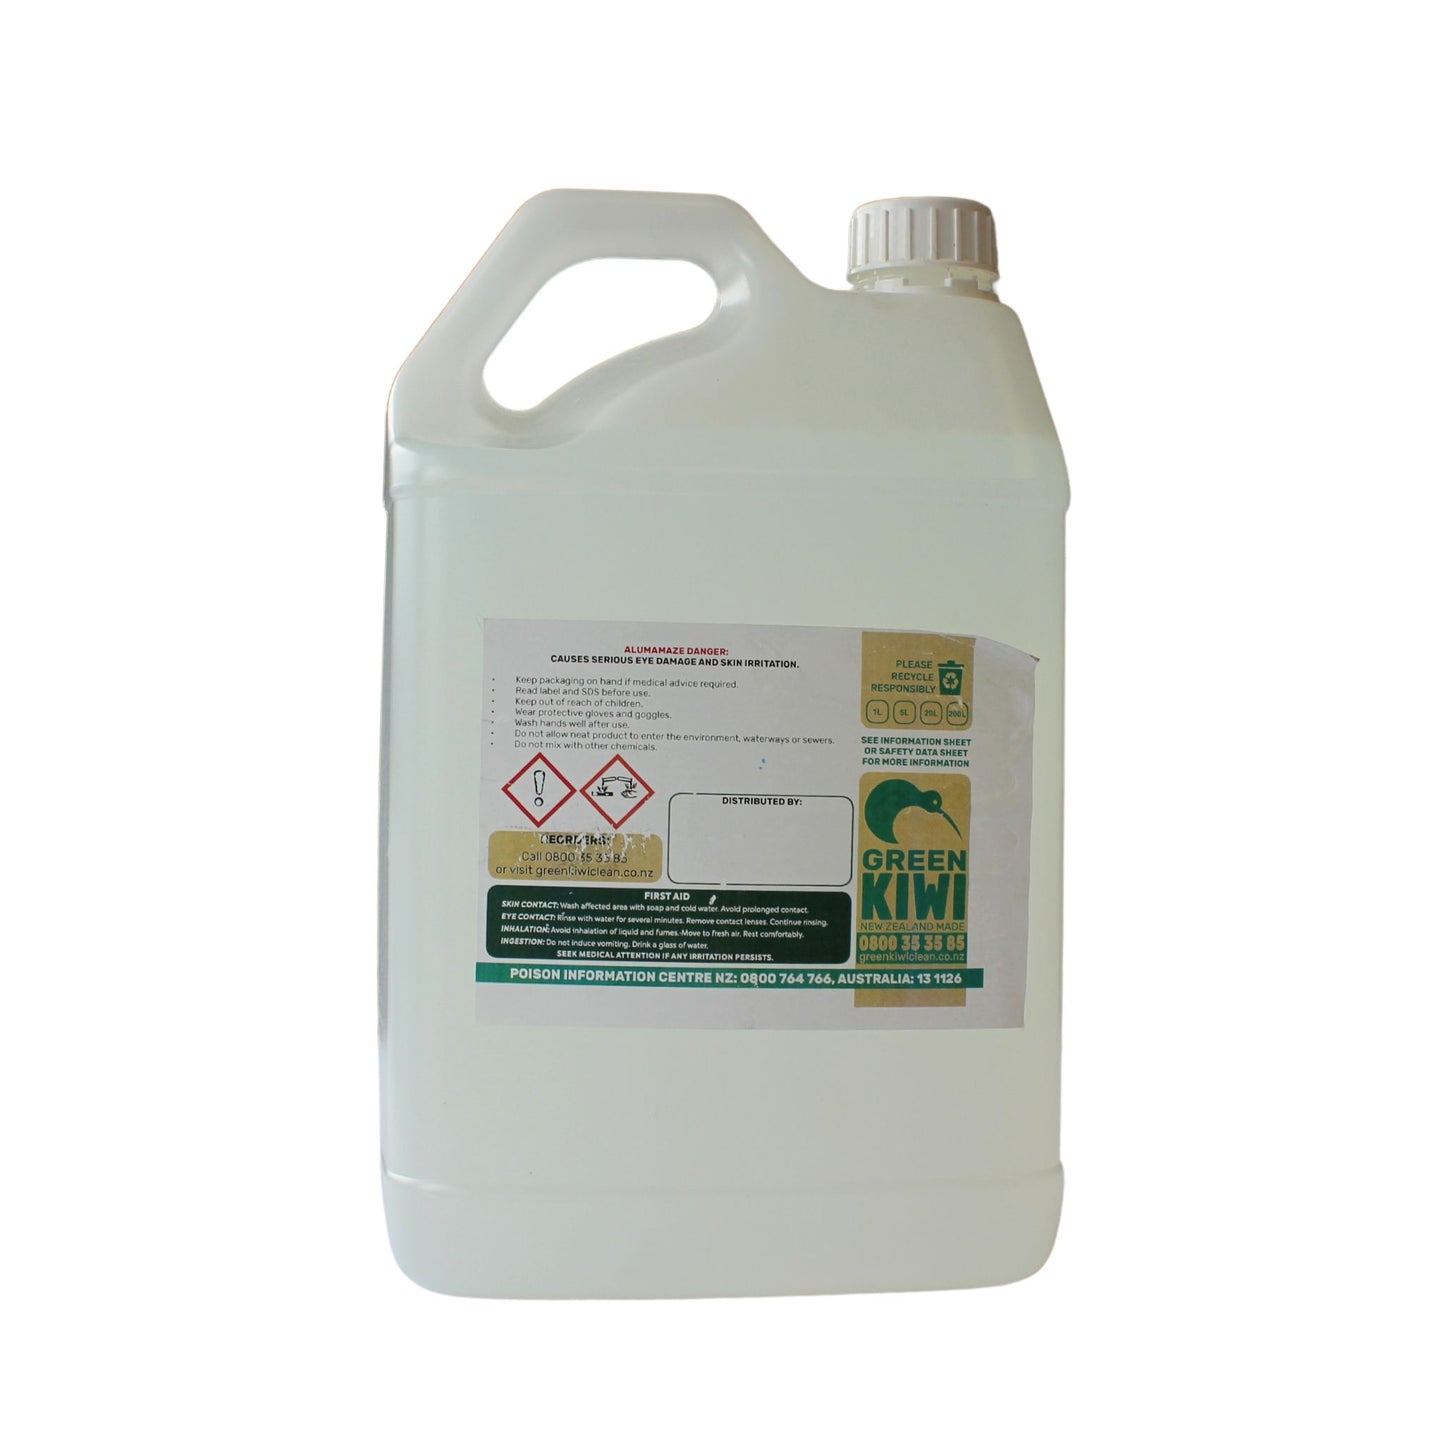 Water based eco friendly metal and aluminium cleaner